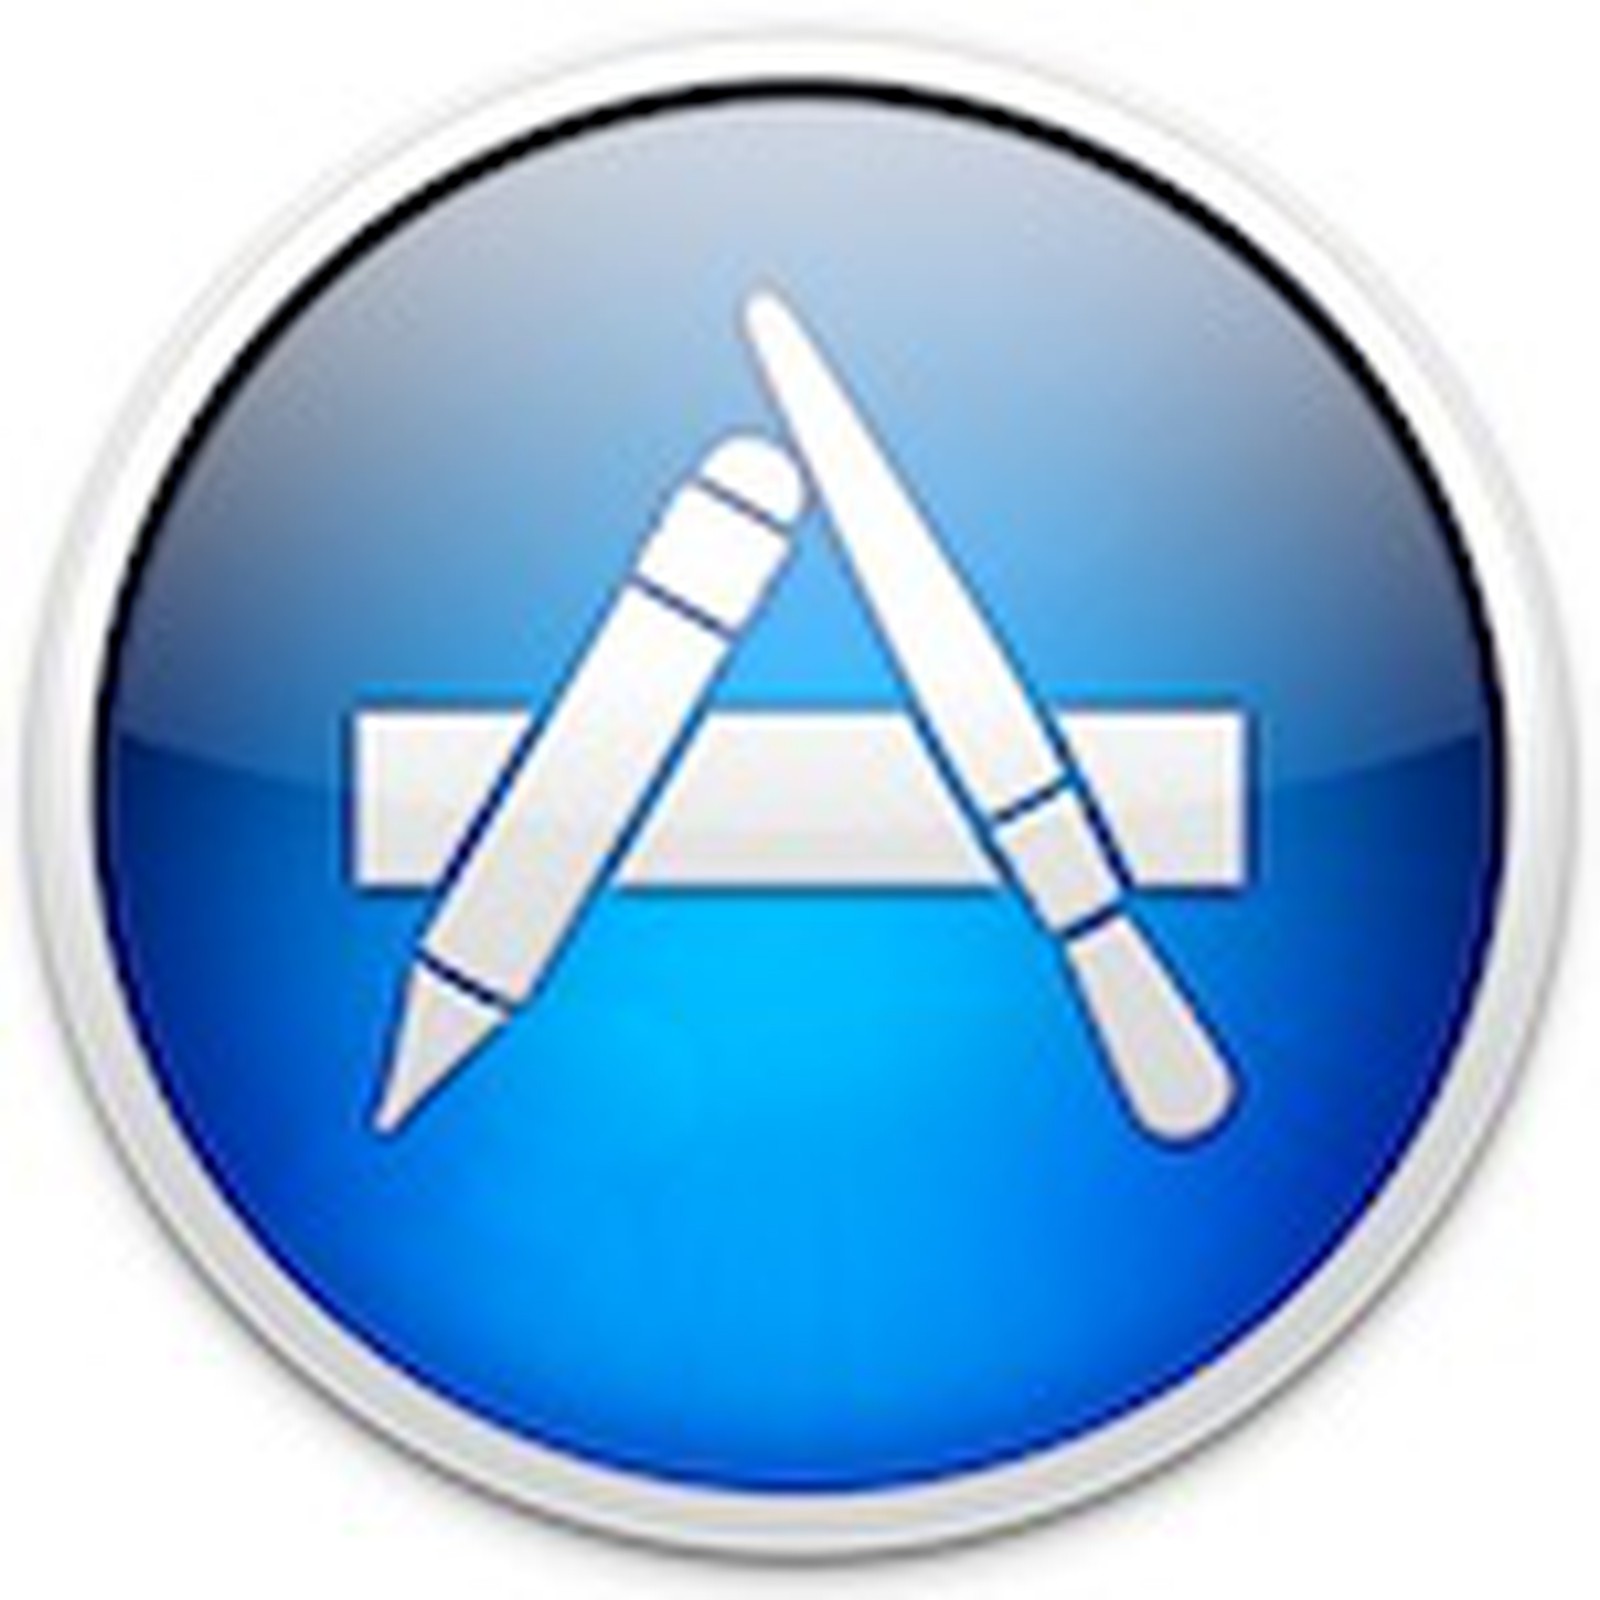 apstore weatherbug for mac does not open